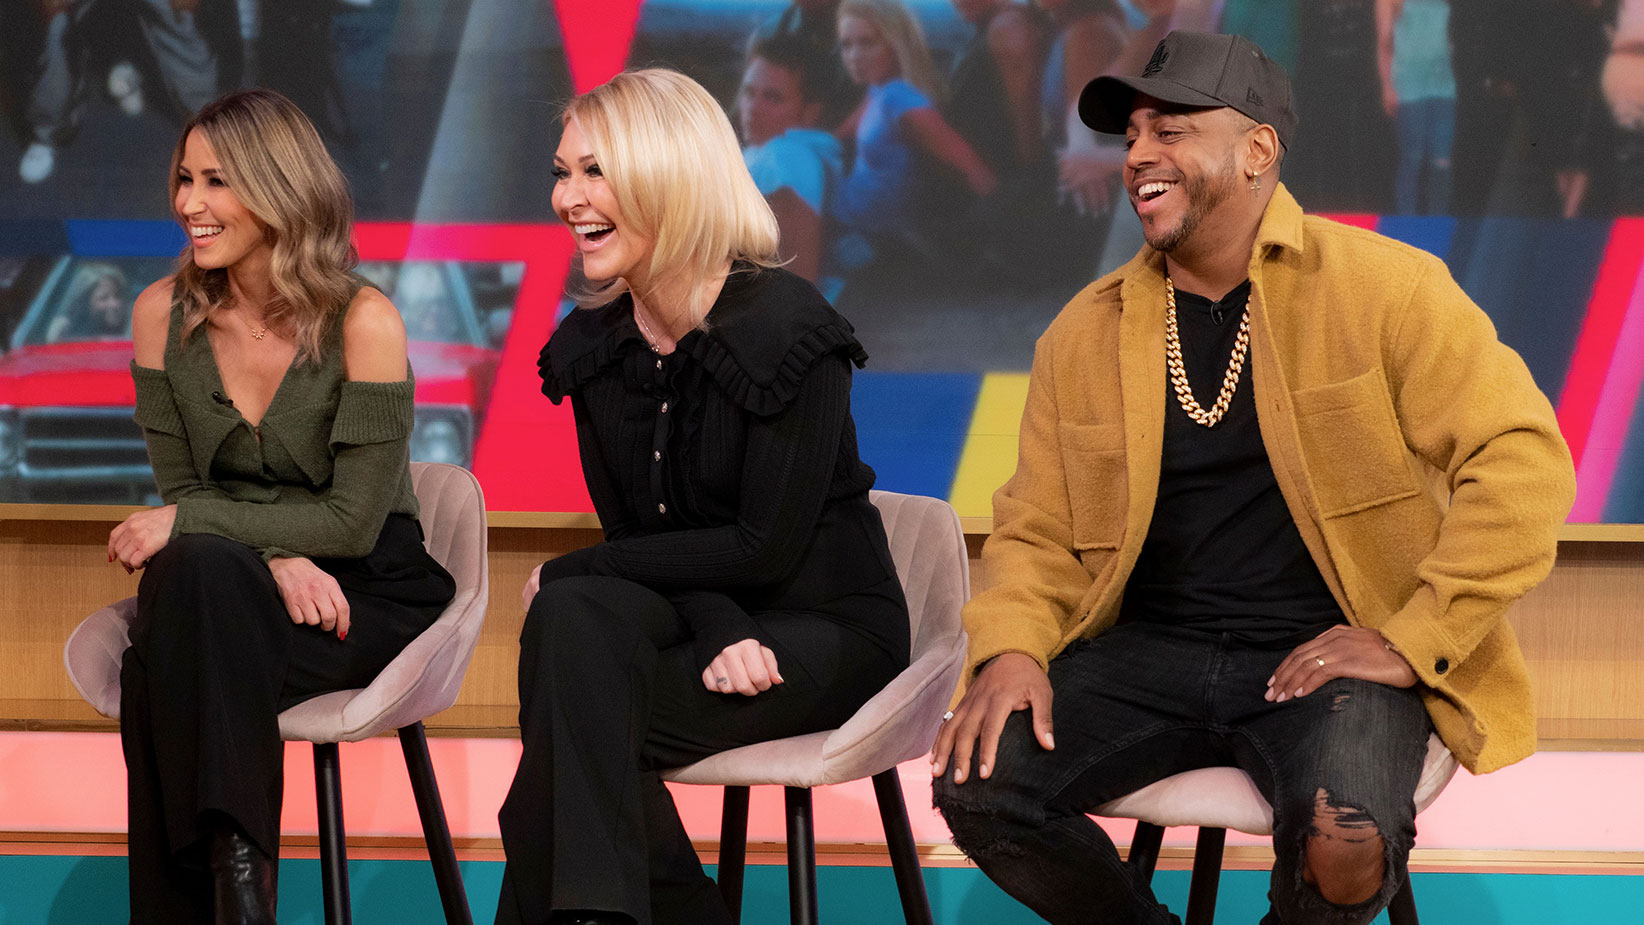 S Club 7 announce reunion tour to celebrate 25th anniversary! | This Morning